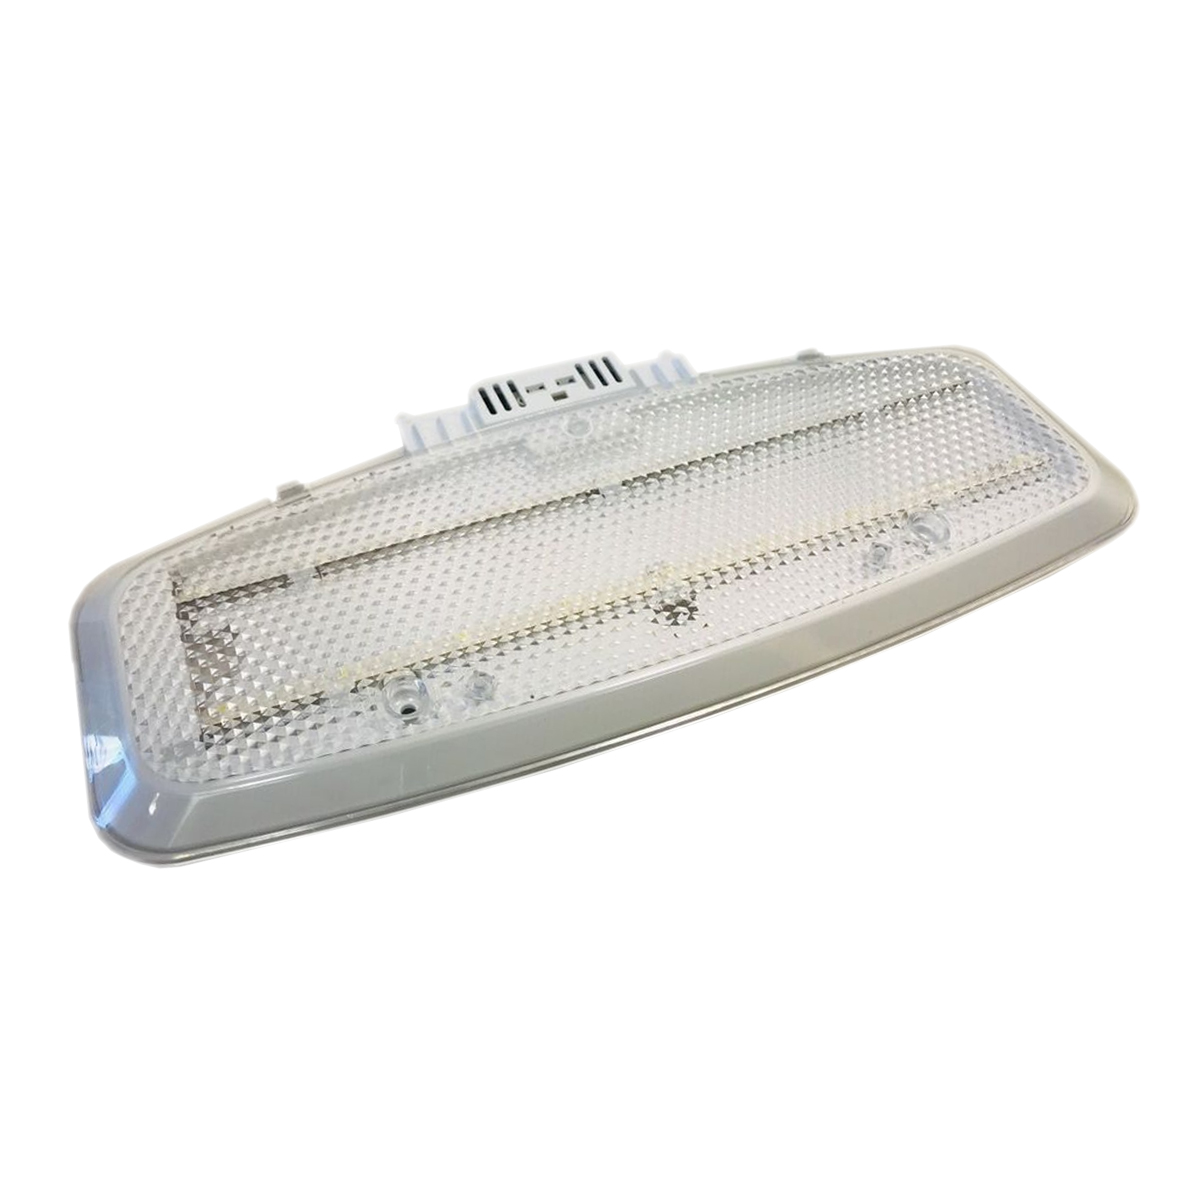 LG Refrigerator Lamp Cover with LED Assembly. Part #ACQ85449501